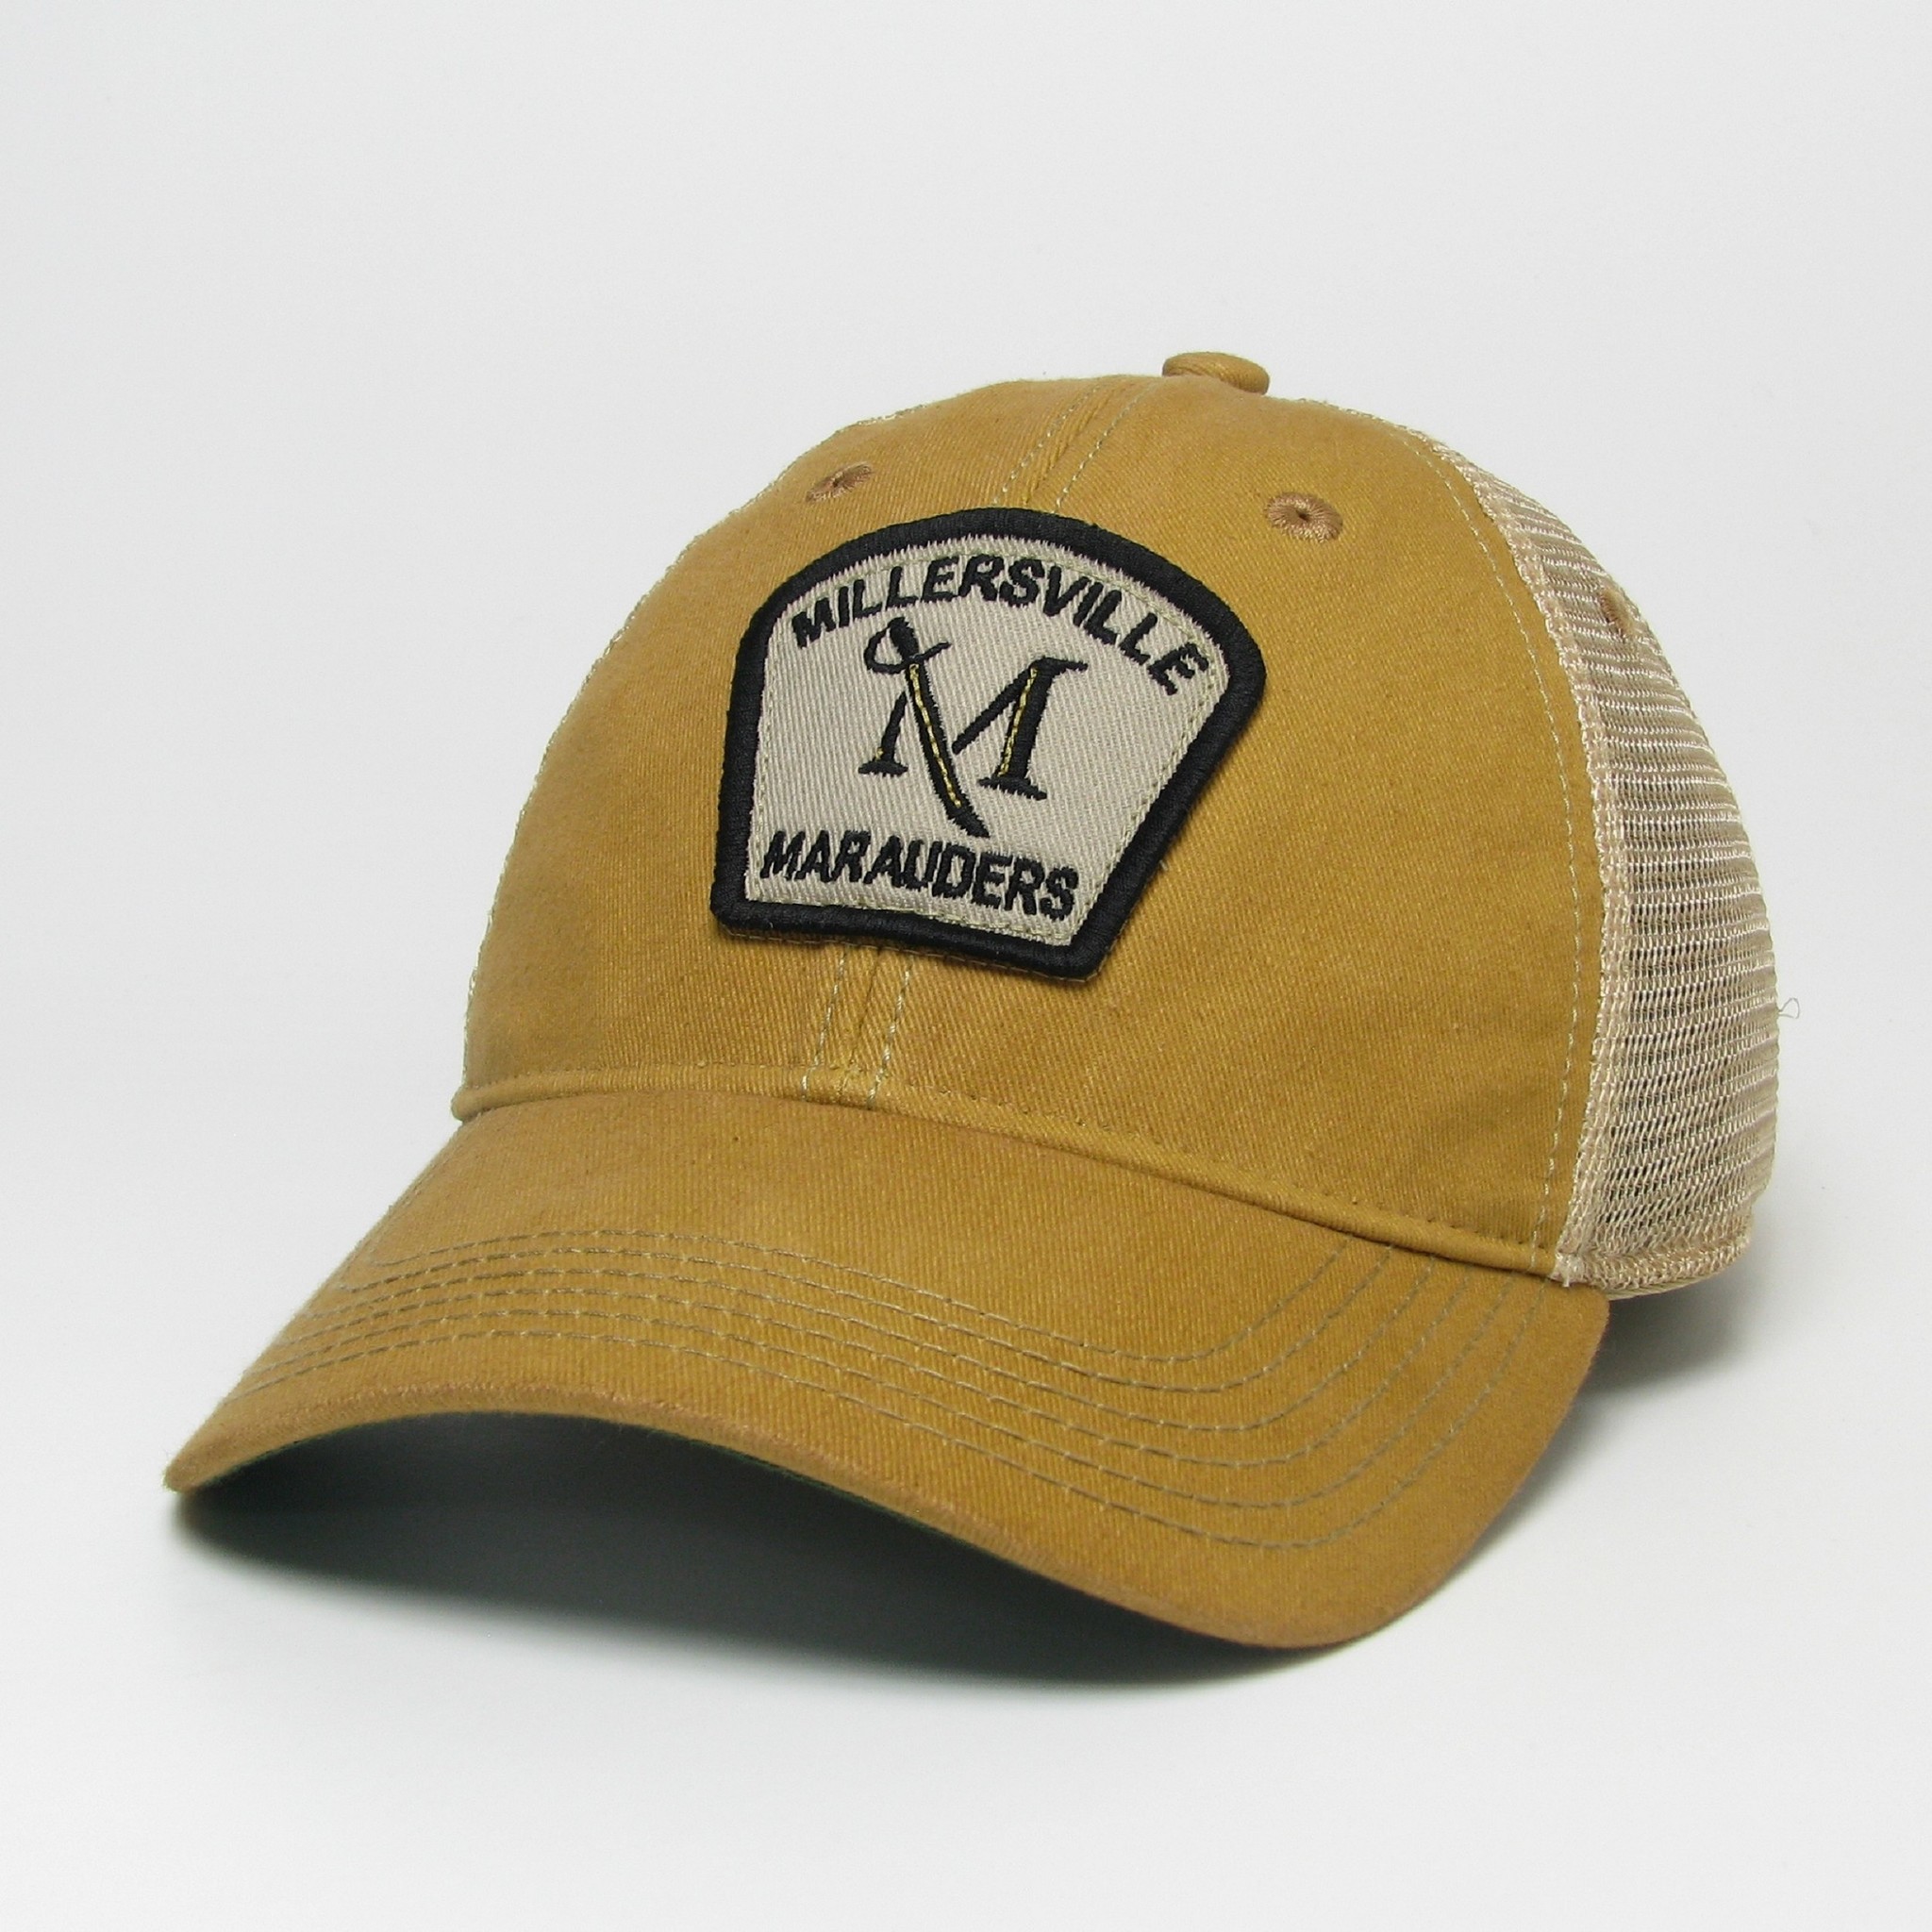 Gold Old Favorite Trucker Cap with Patch - Millersville University Store